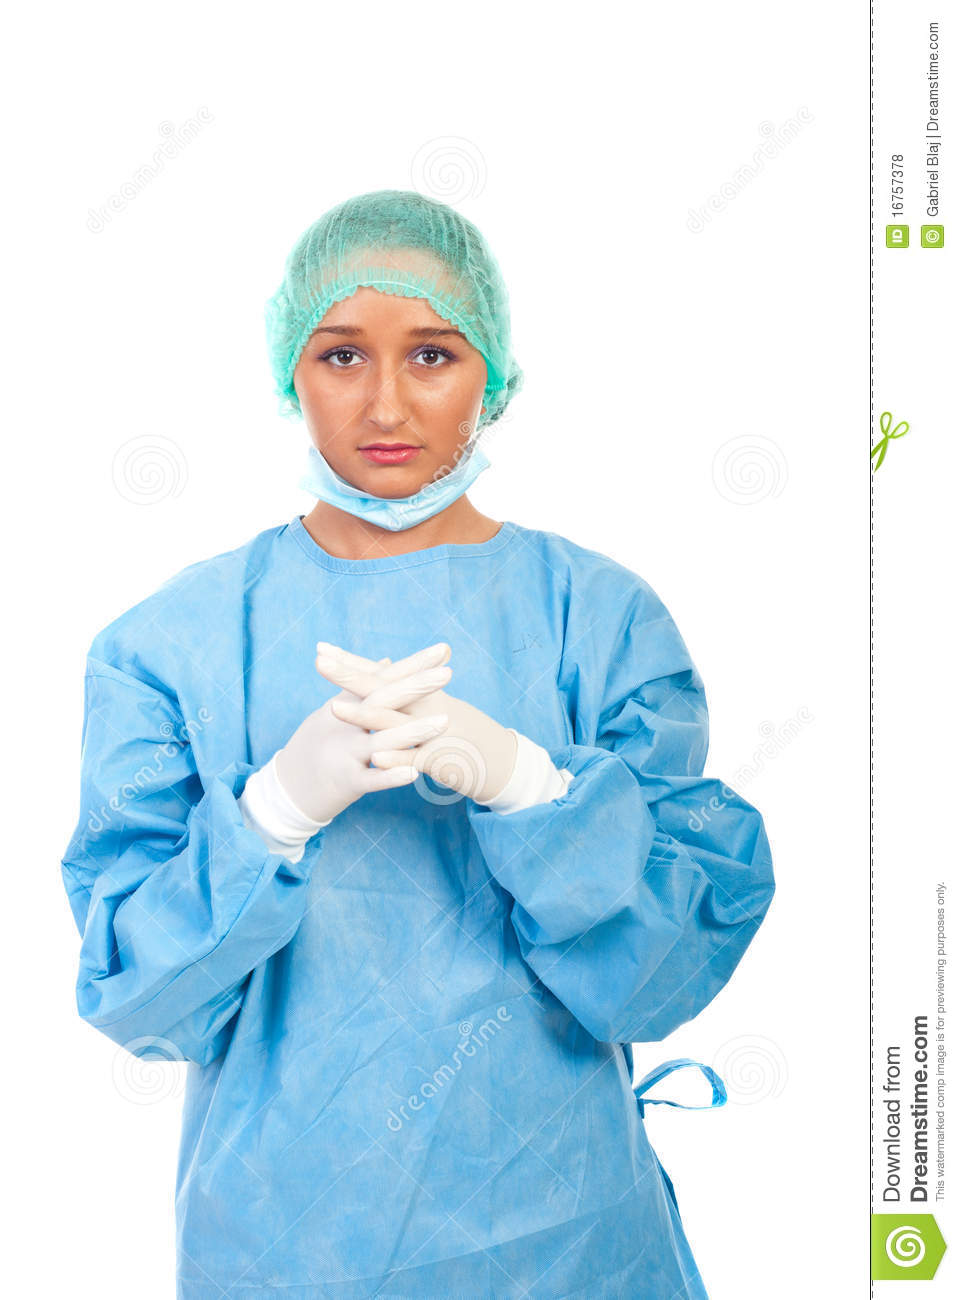 Serious Surgeon Woman With Sterile Gloves Royalty Free Stock Photos